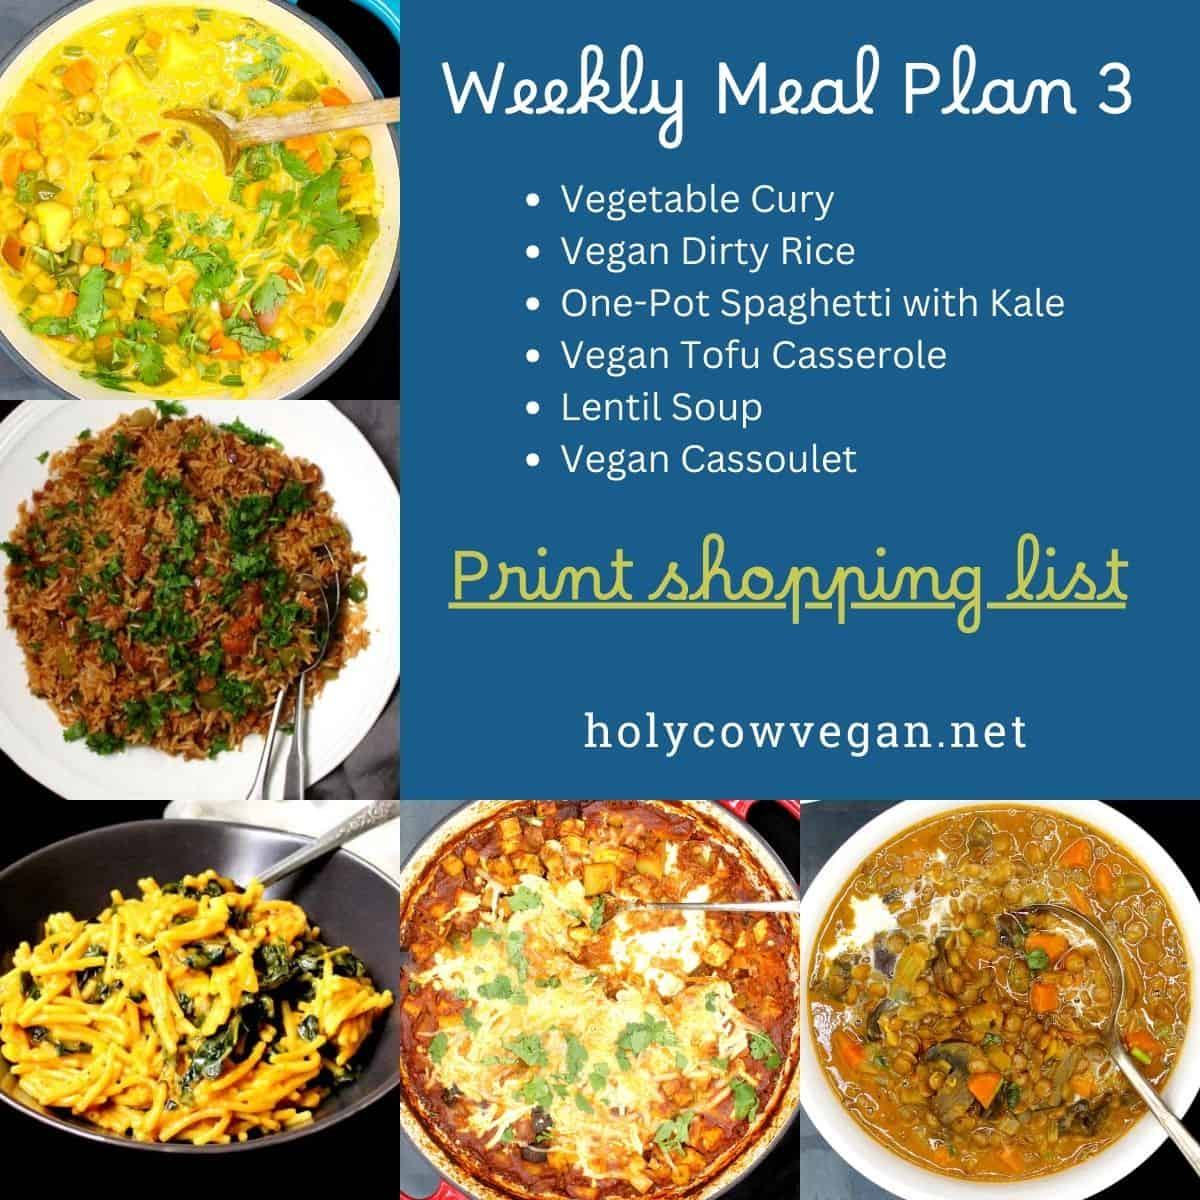 Weekly meal plan 3 with images of five dinners and a list, and link to printable shopping list.